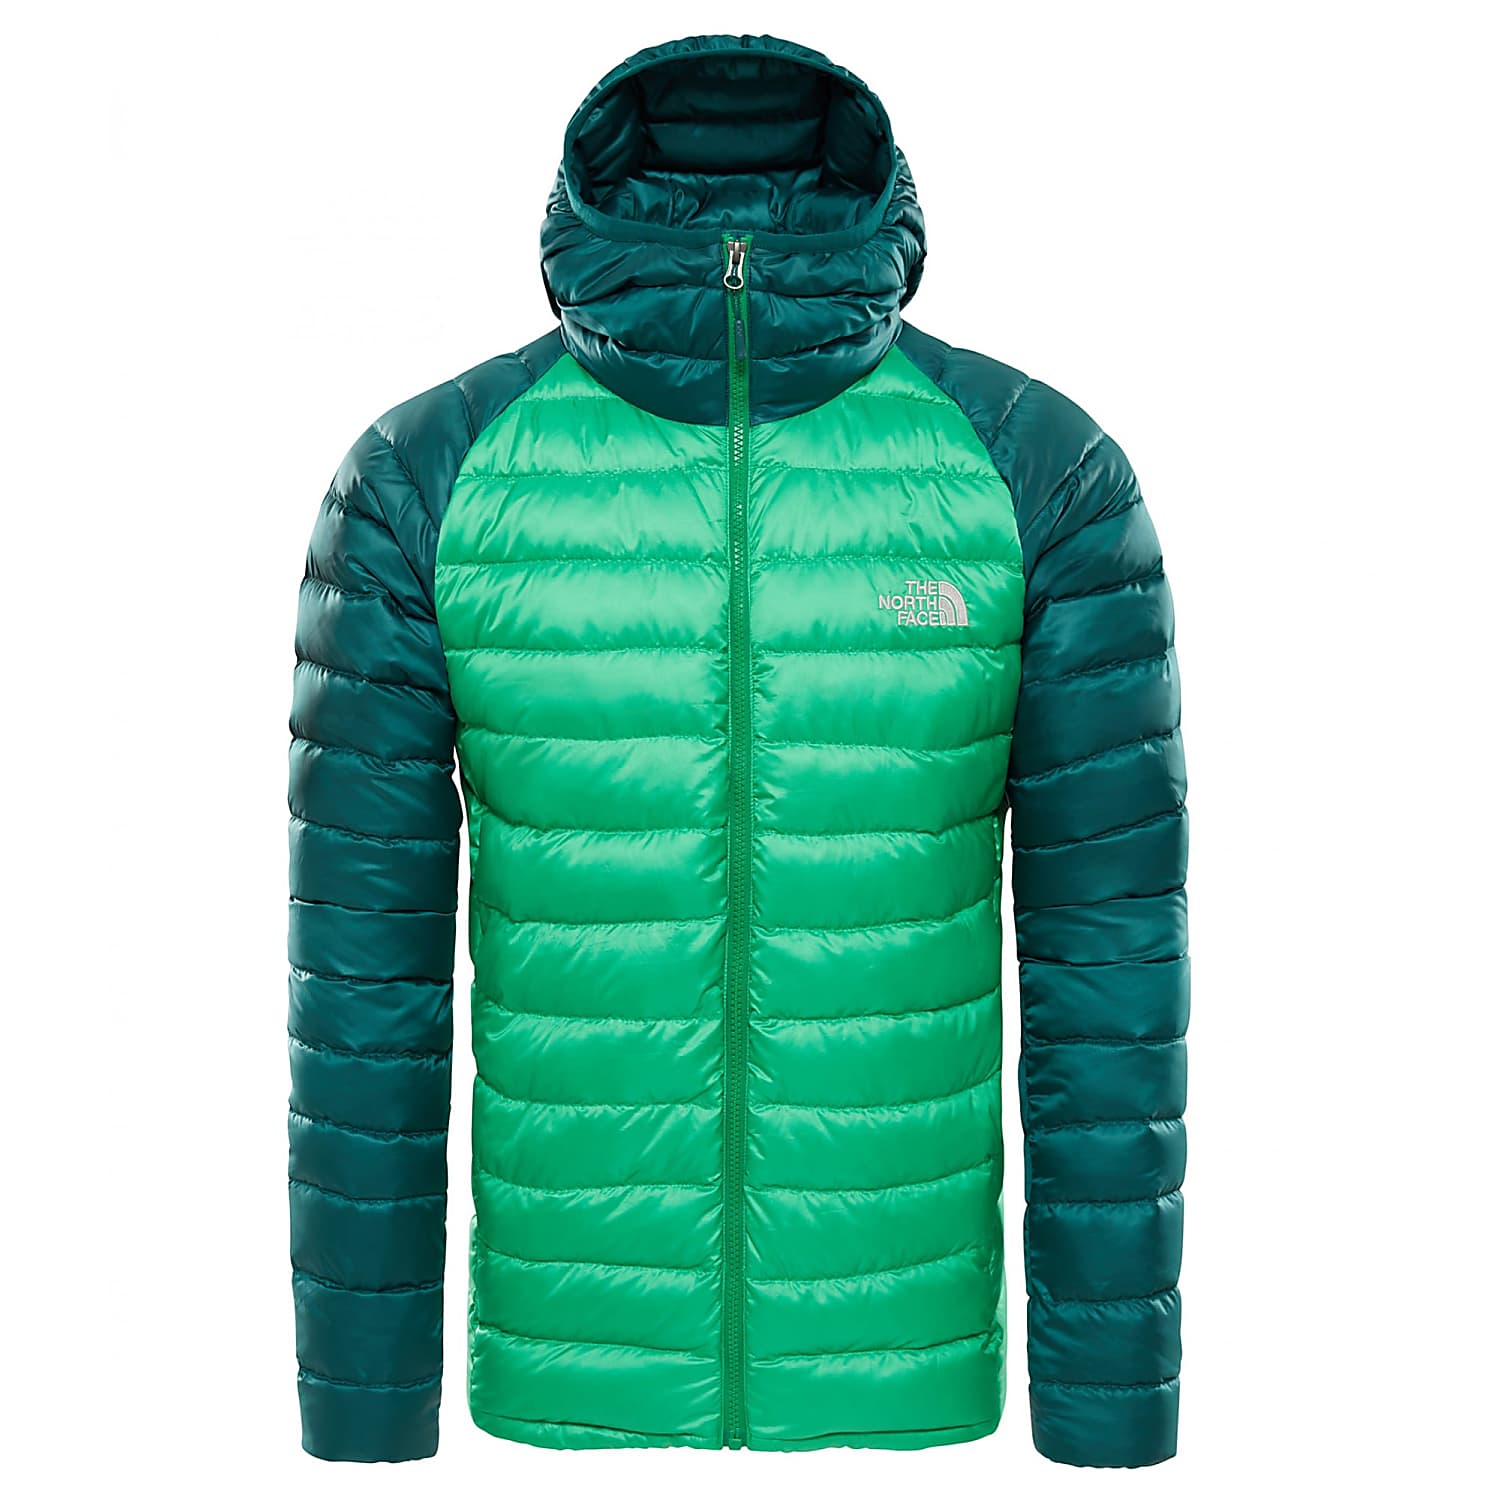 The North Face Trevail Hoodie Jacket Factory SAVE 32% - mpgc.net